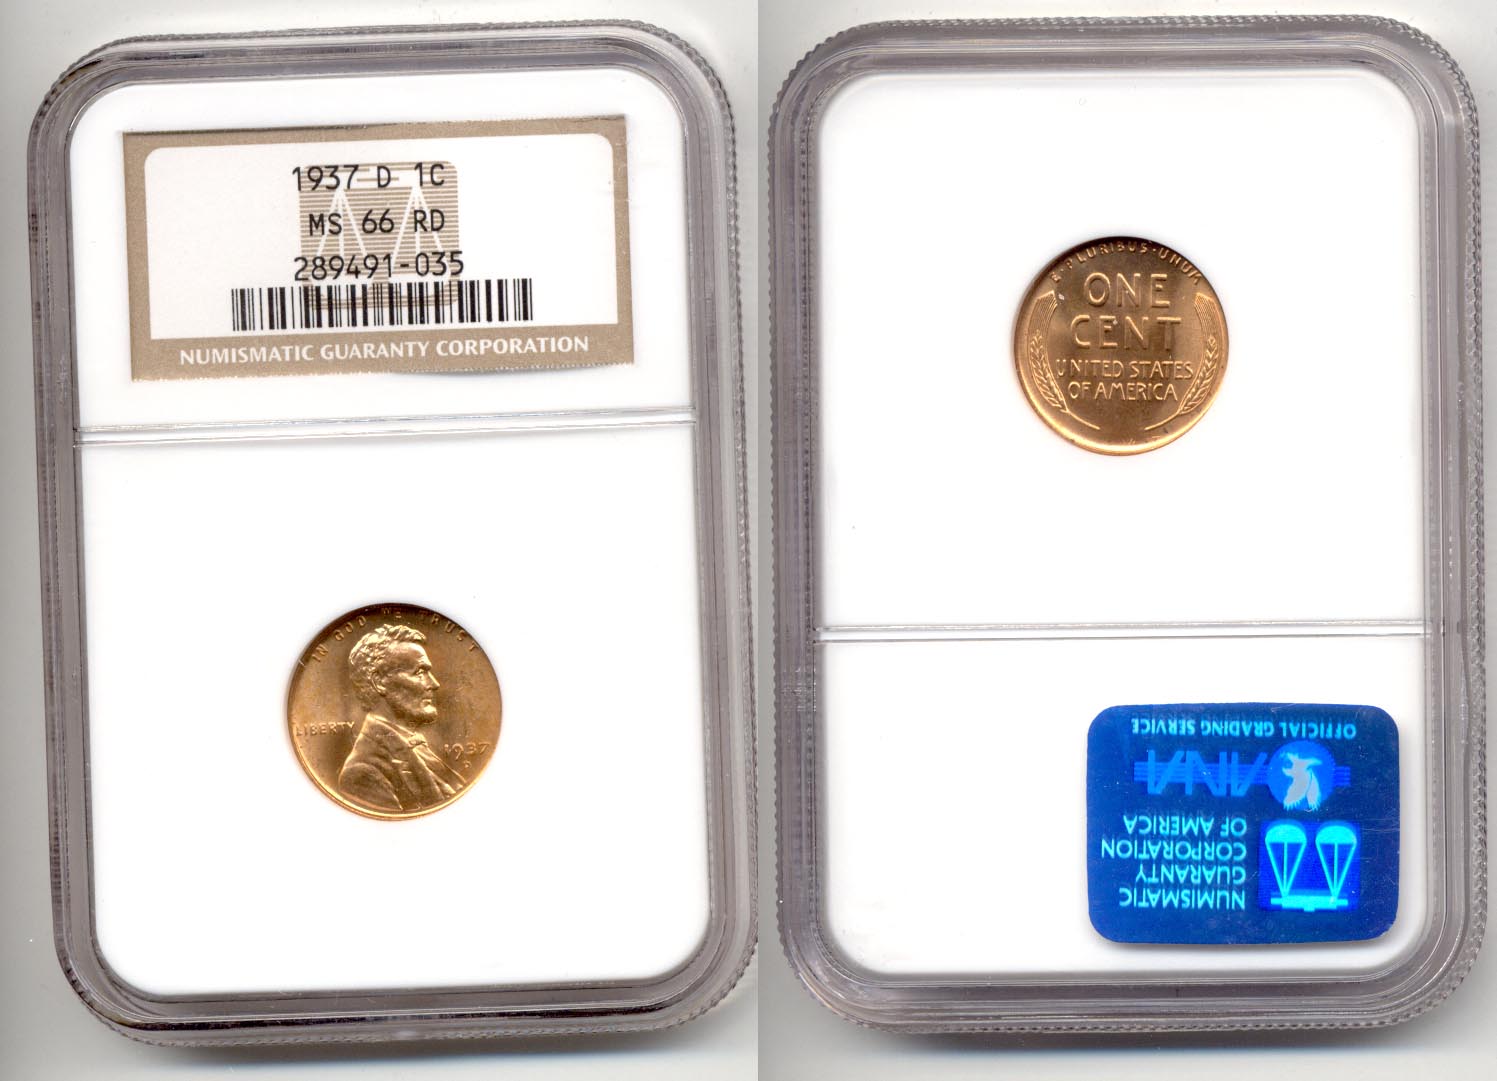 1937-D Lincoln Cent NGC MS-66 Red